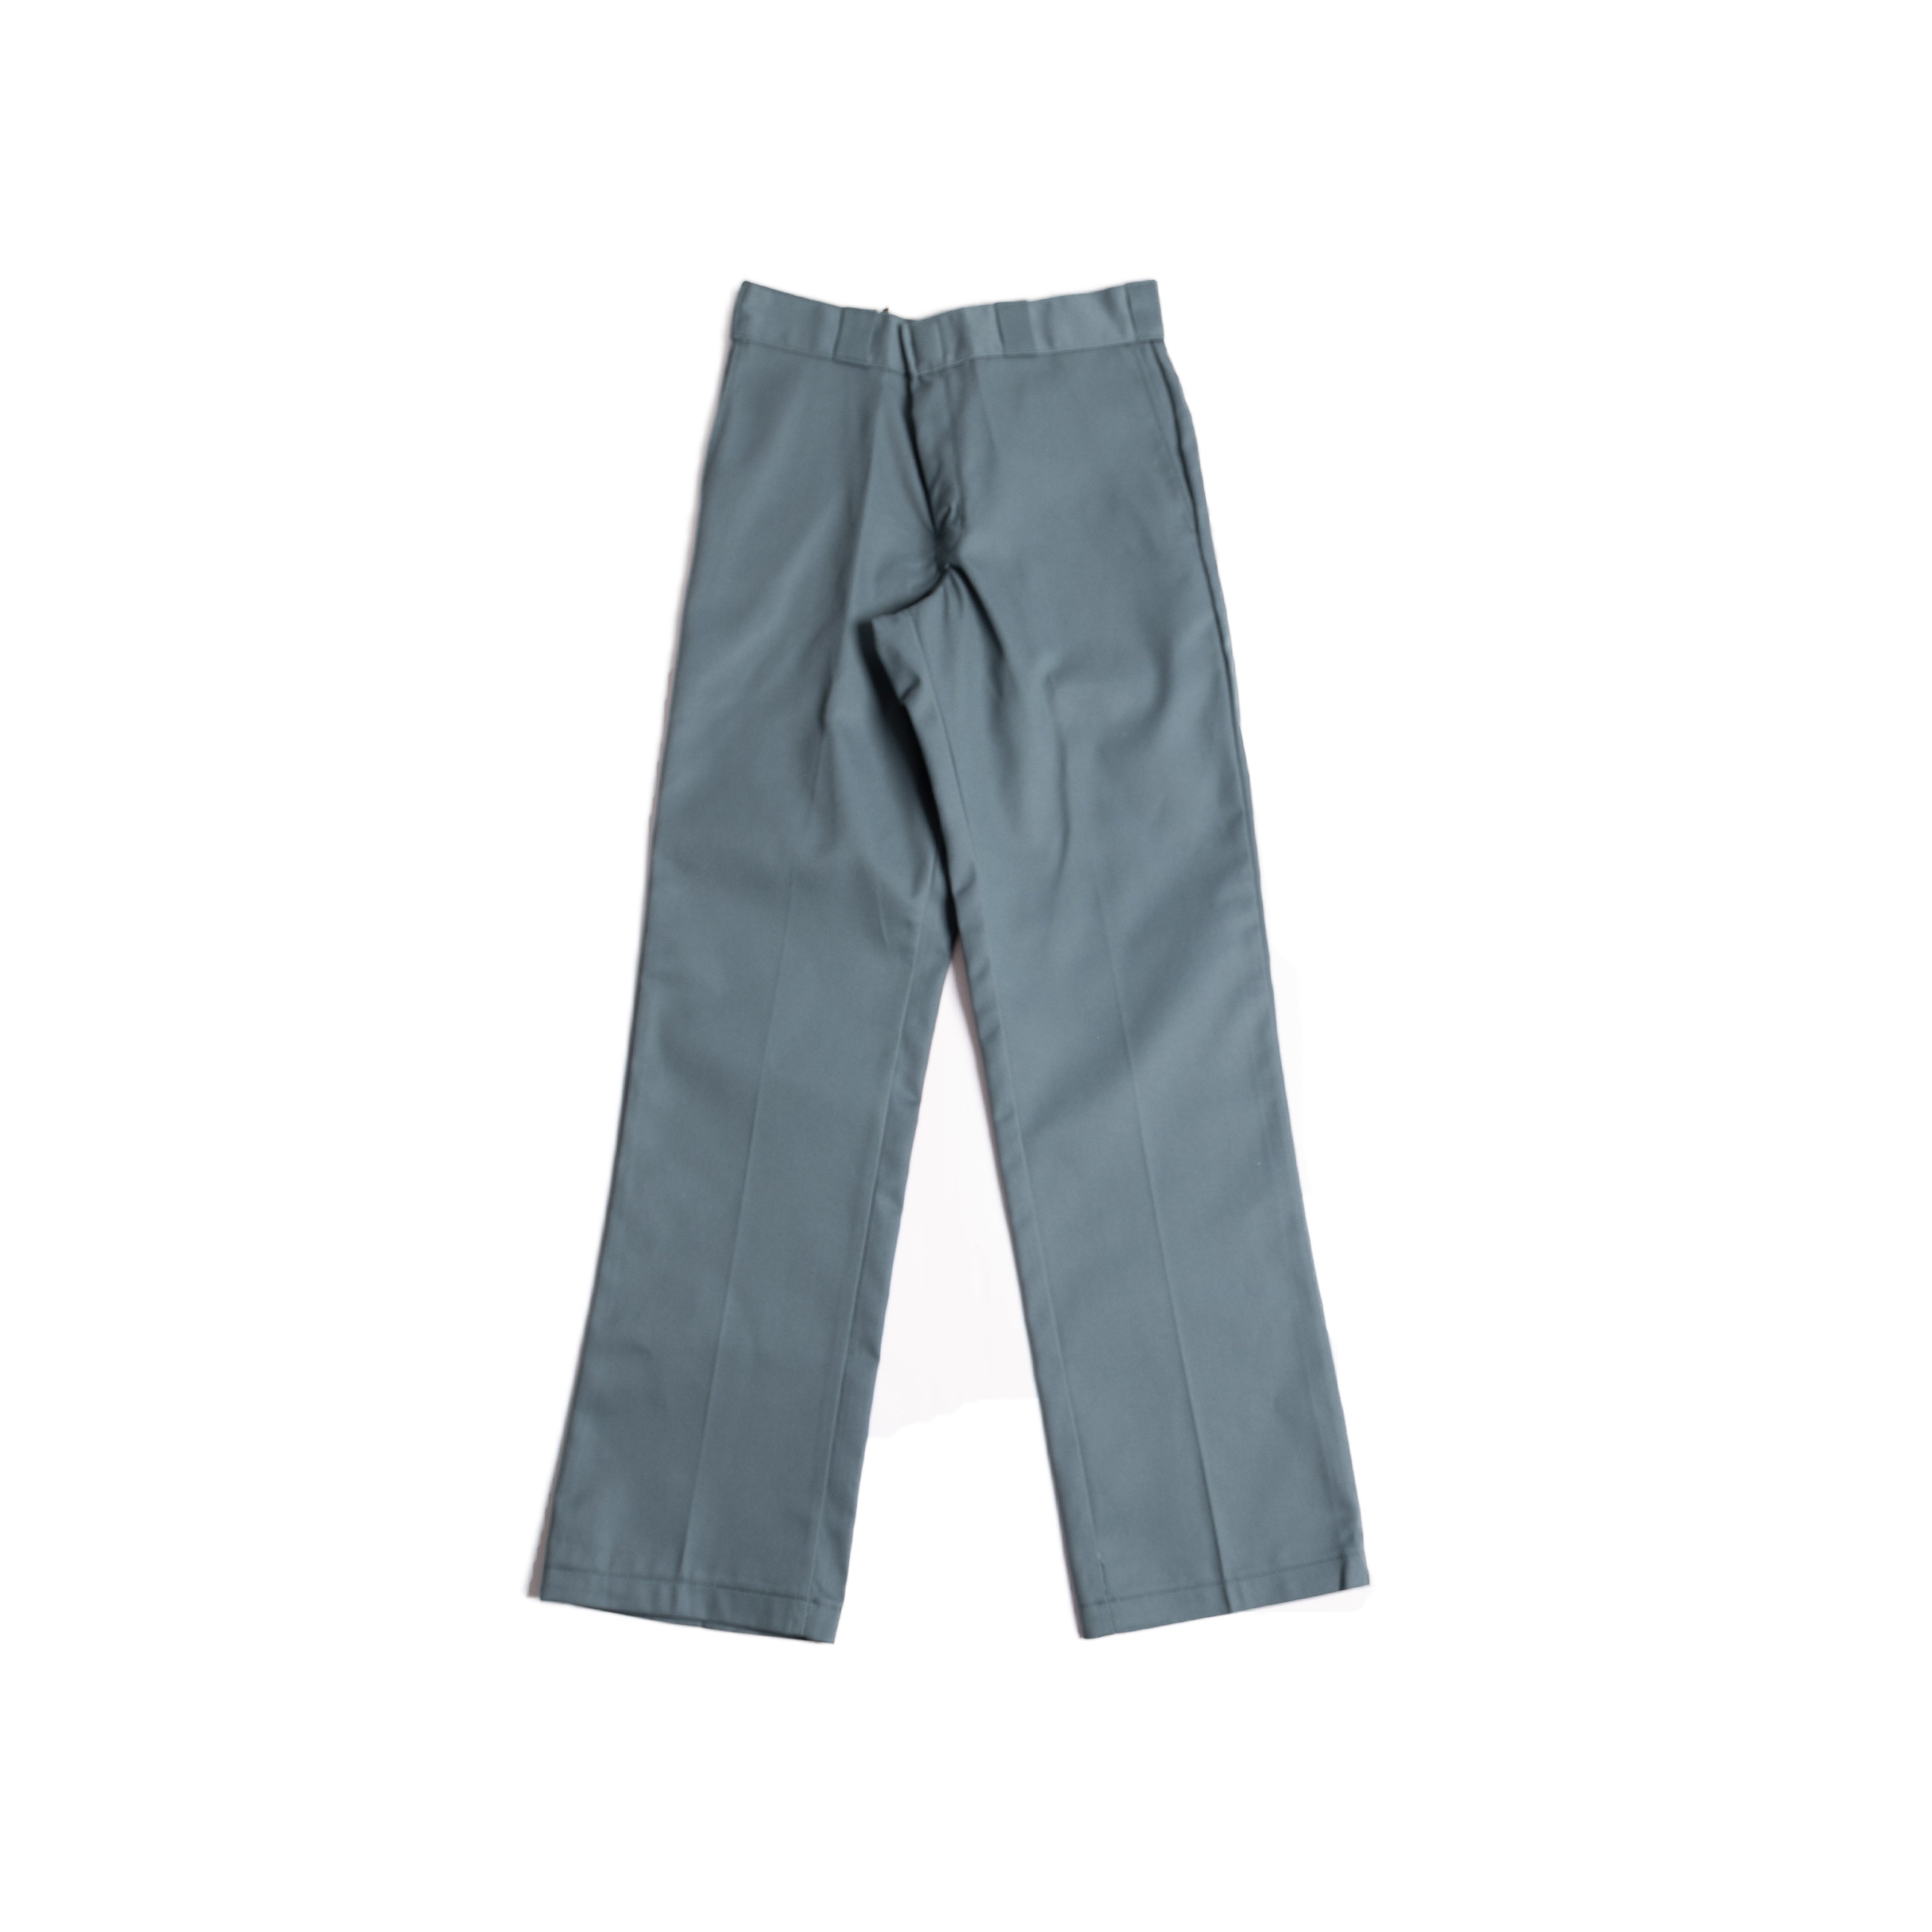 Dickies 874 Original Work Pant (Relaxed) - Lincoln Green on Garmentory